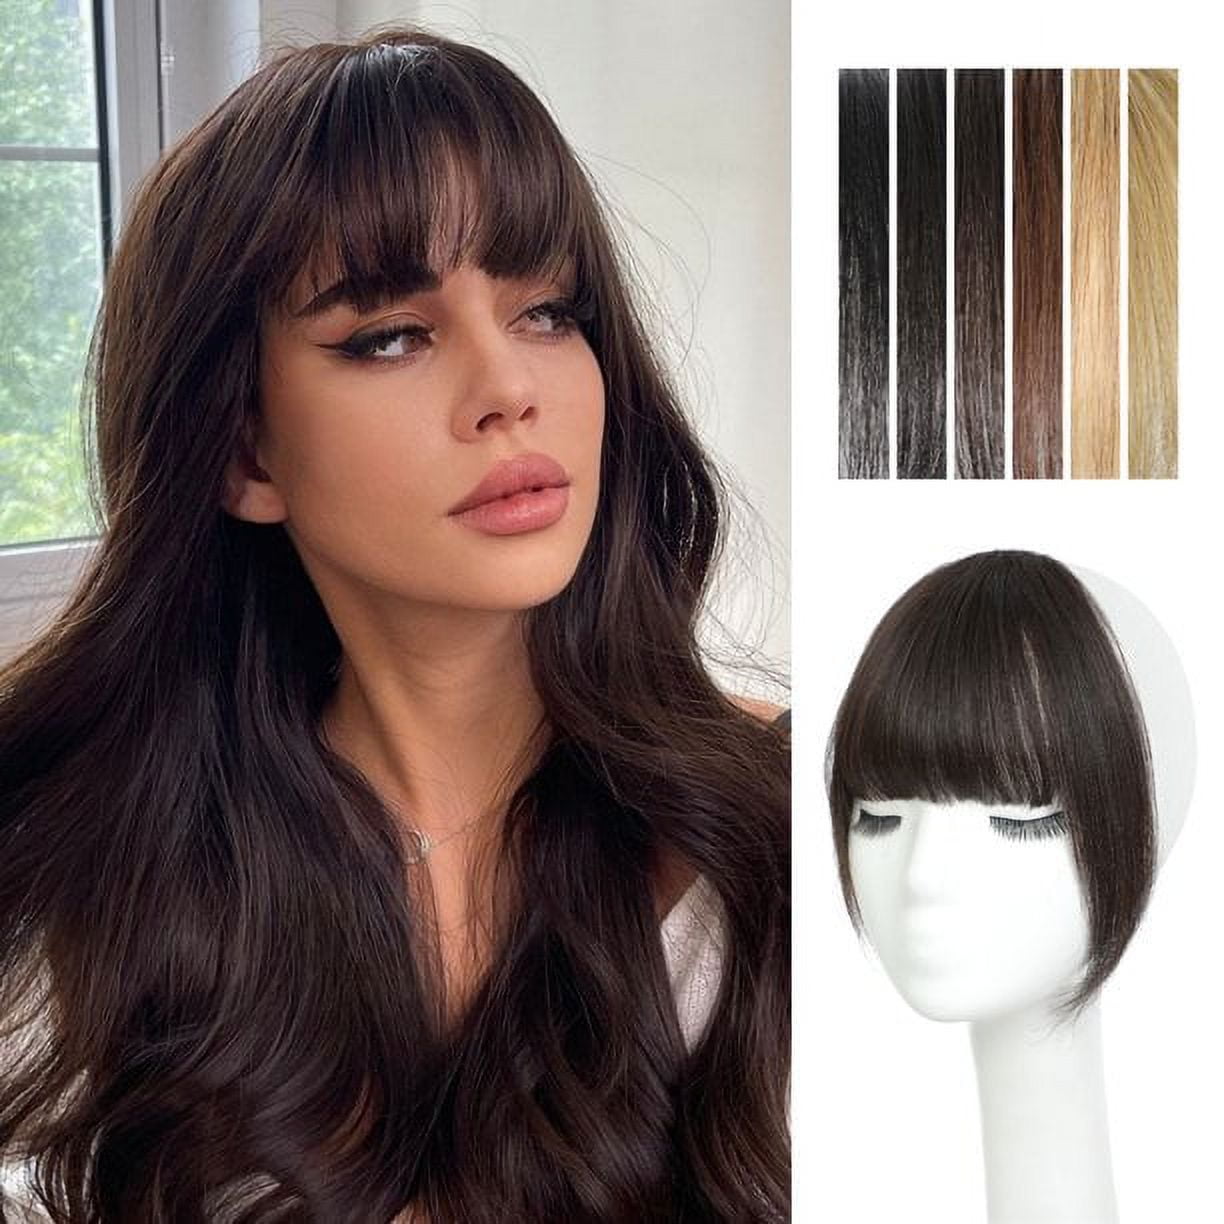 Clip in Bangs for Women 100% Human Hair Extensions French Bangs Flat ...